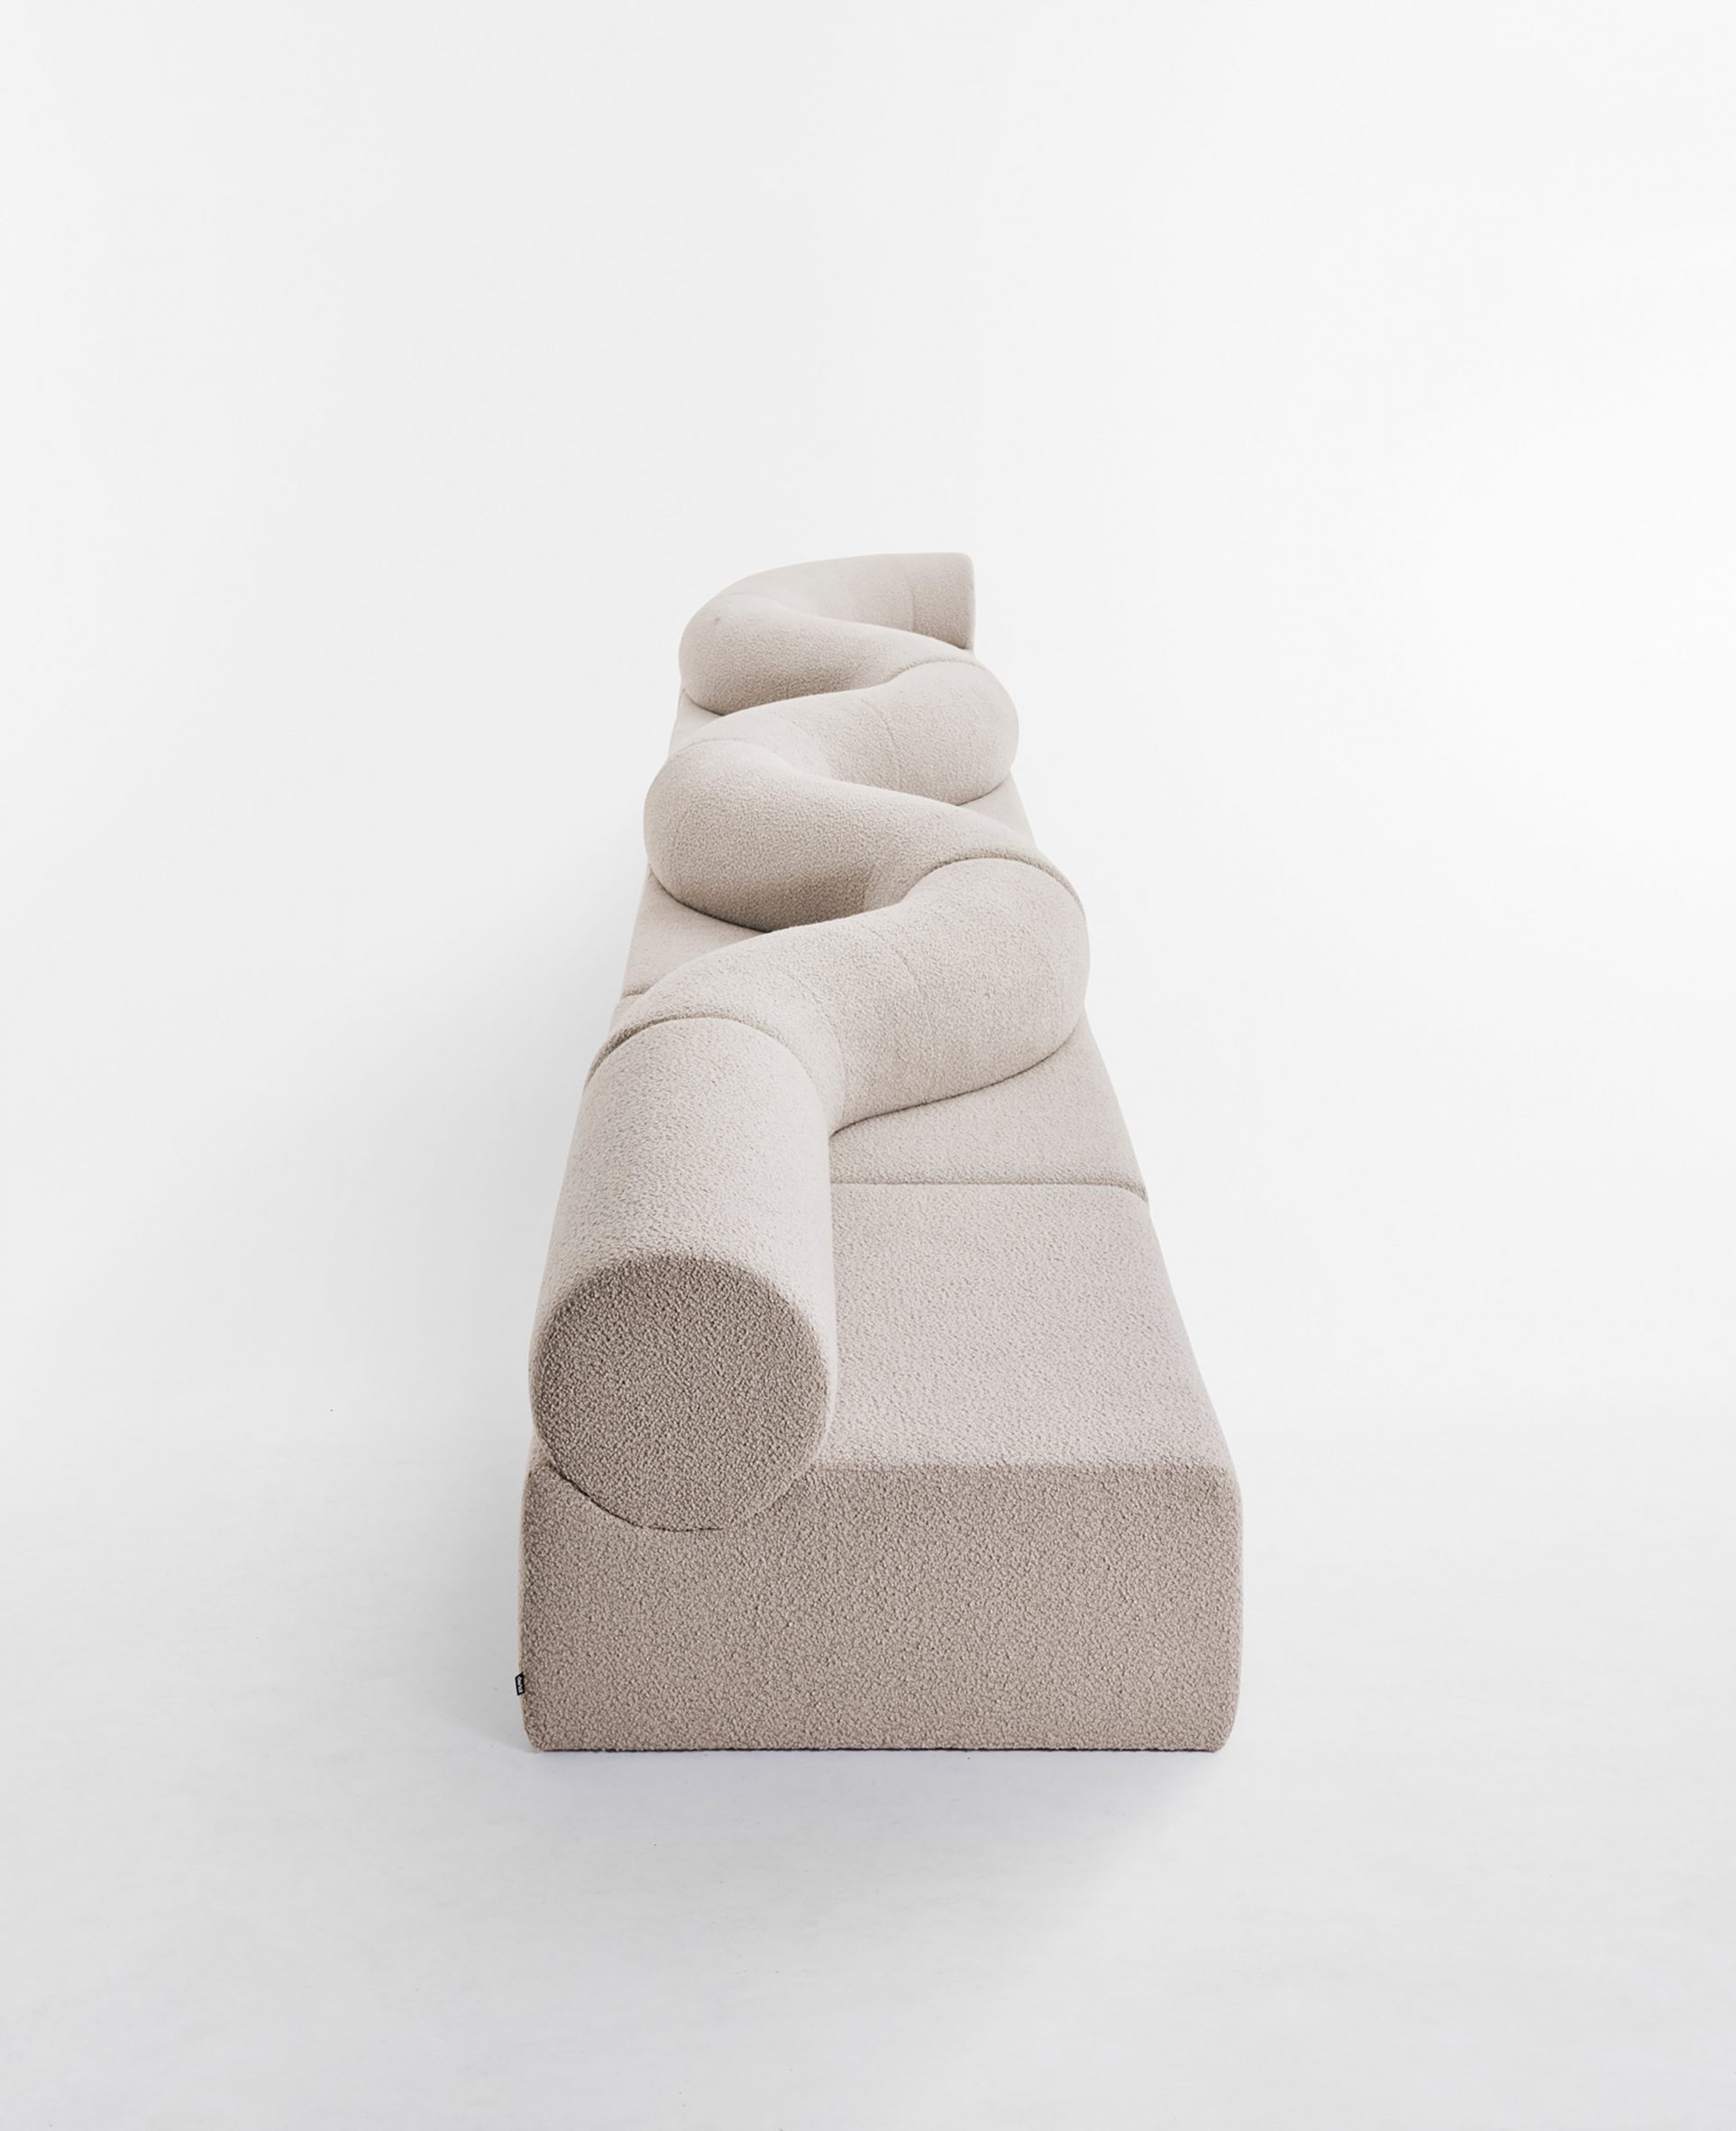 Pipeline seating by Alexander Lotersztain for Derlot